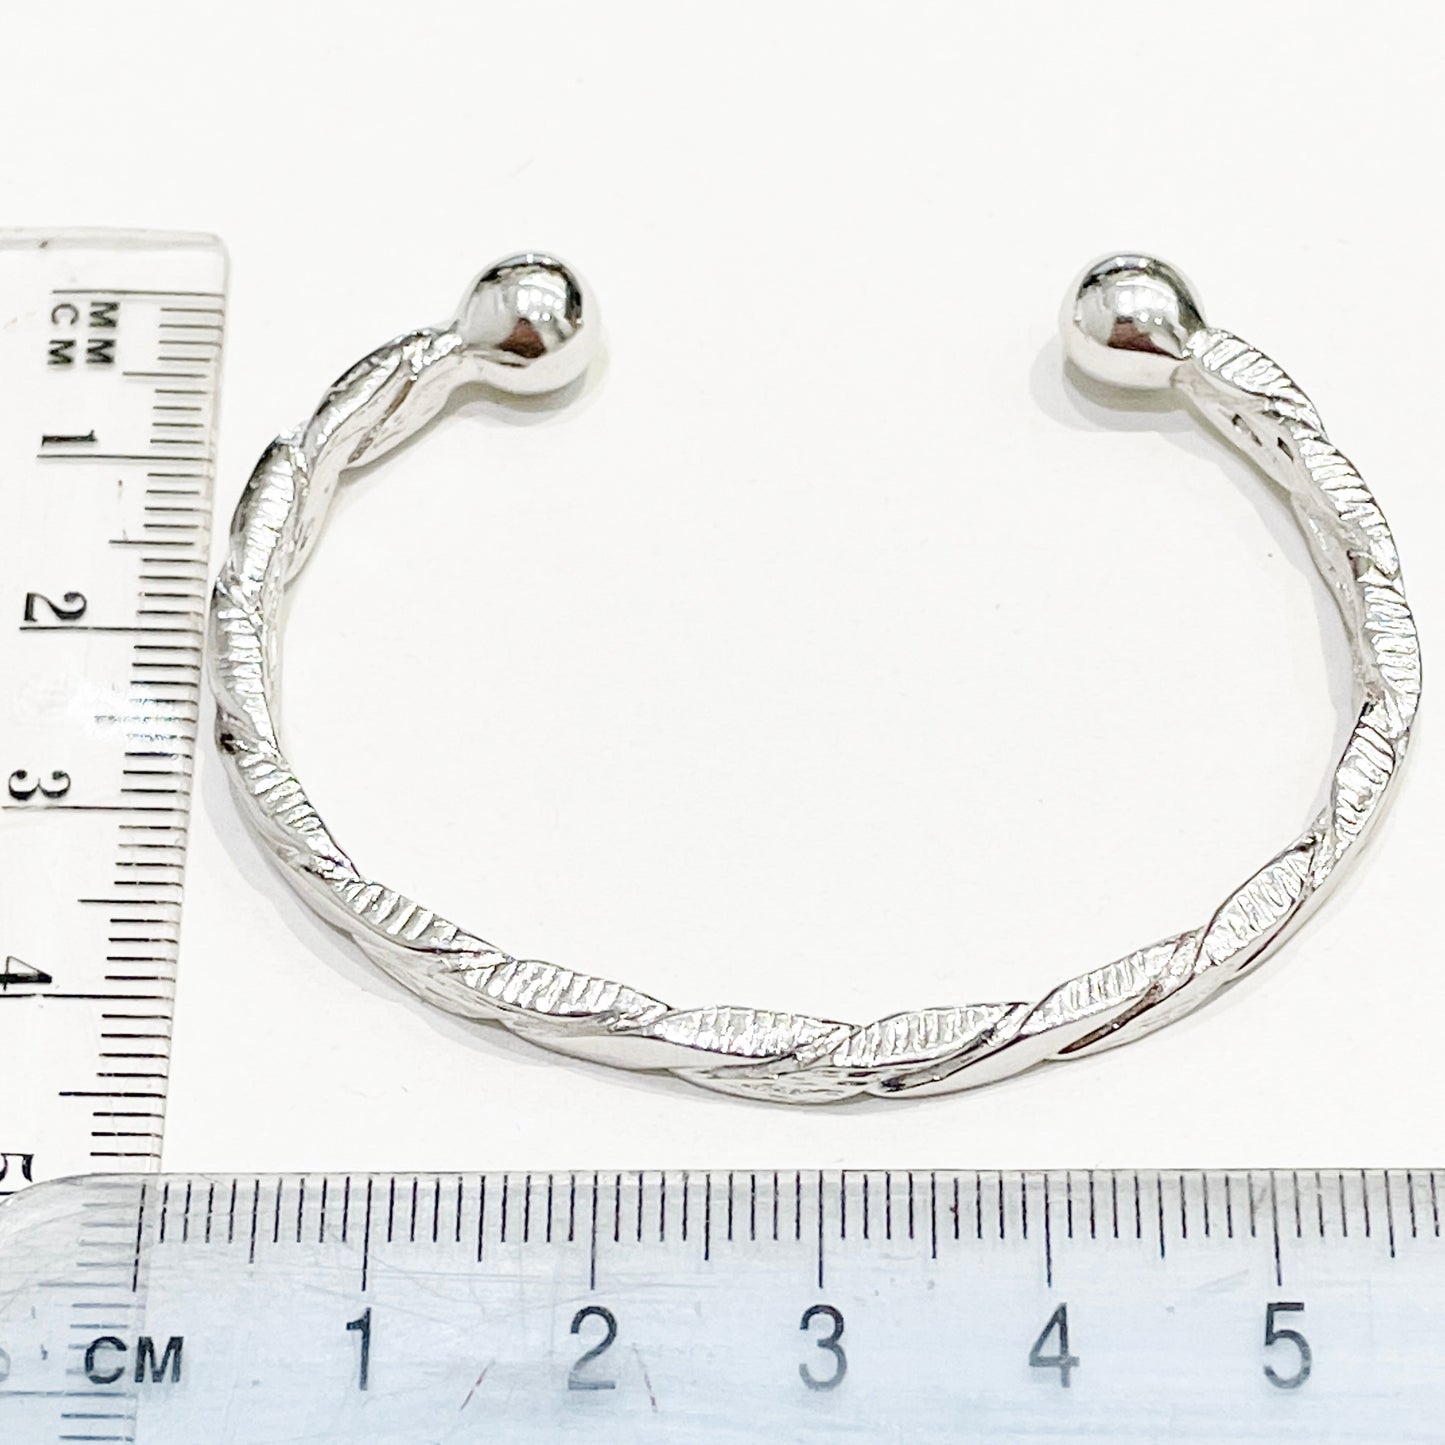 Childs torque bangle twisted patterned solid sterling silver measurements